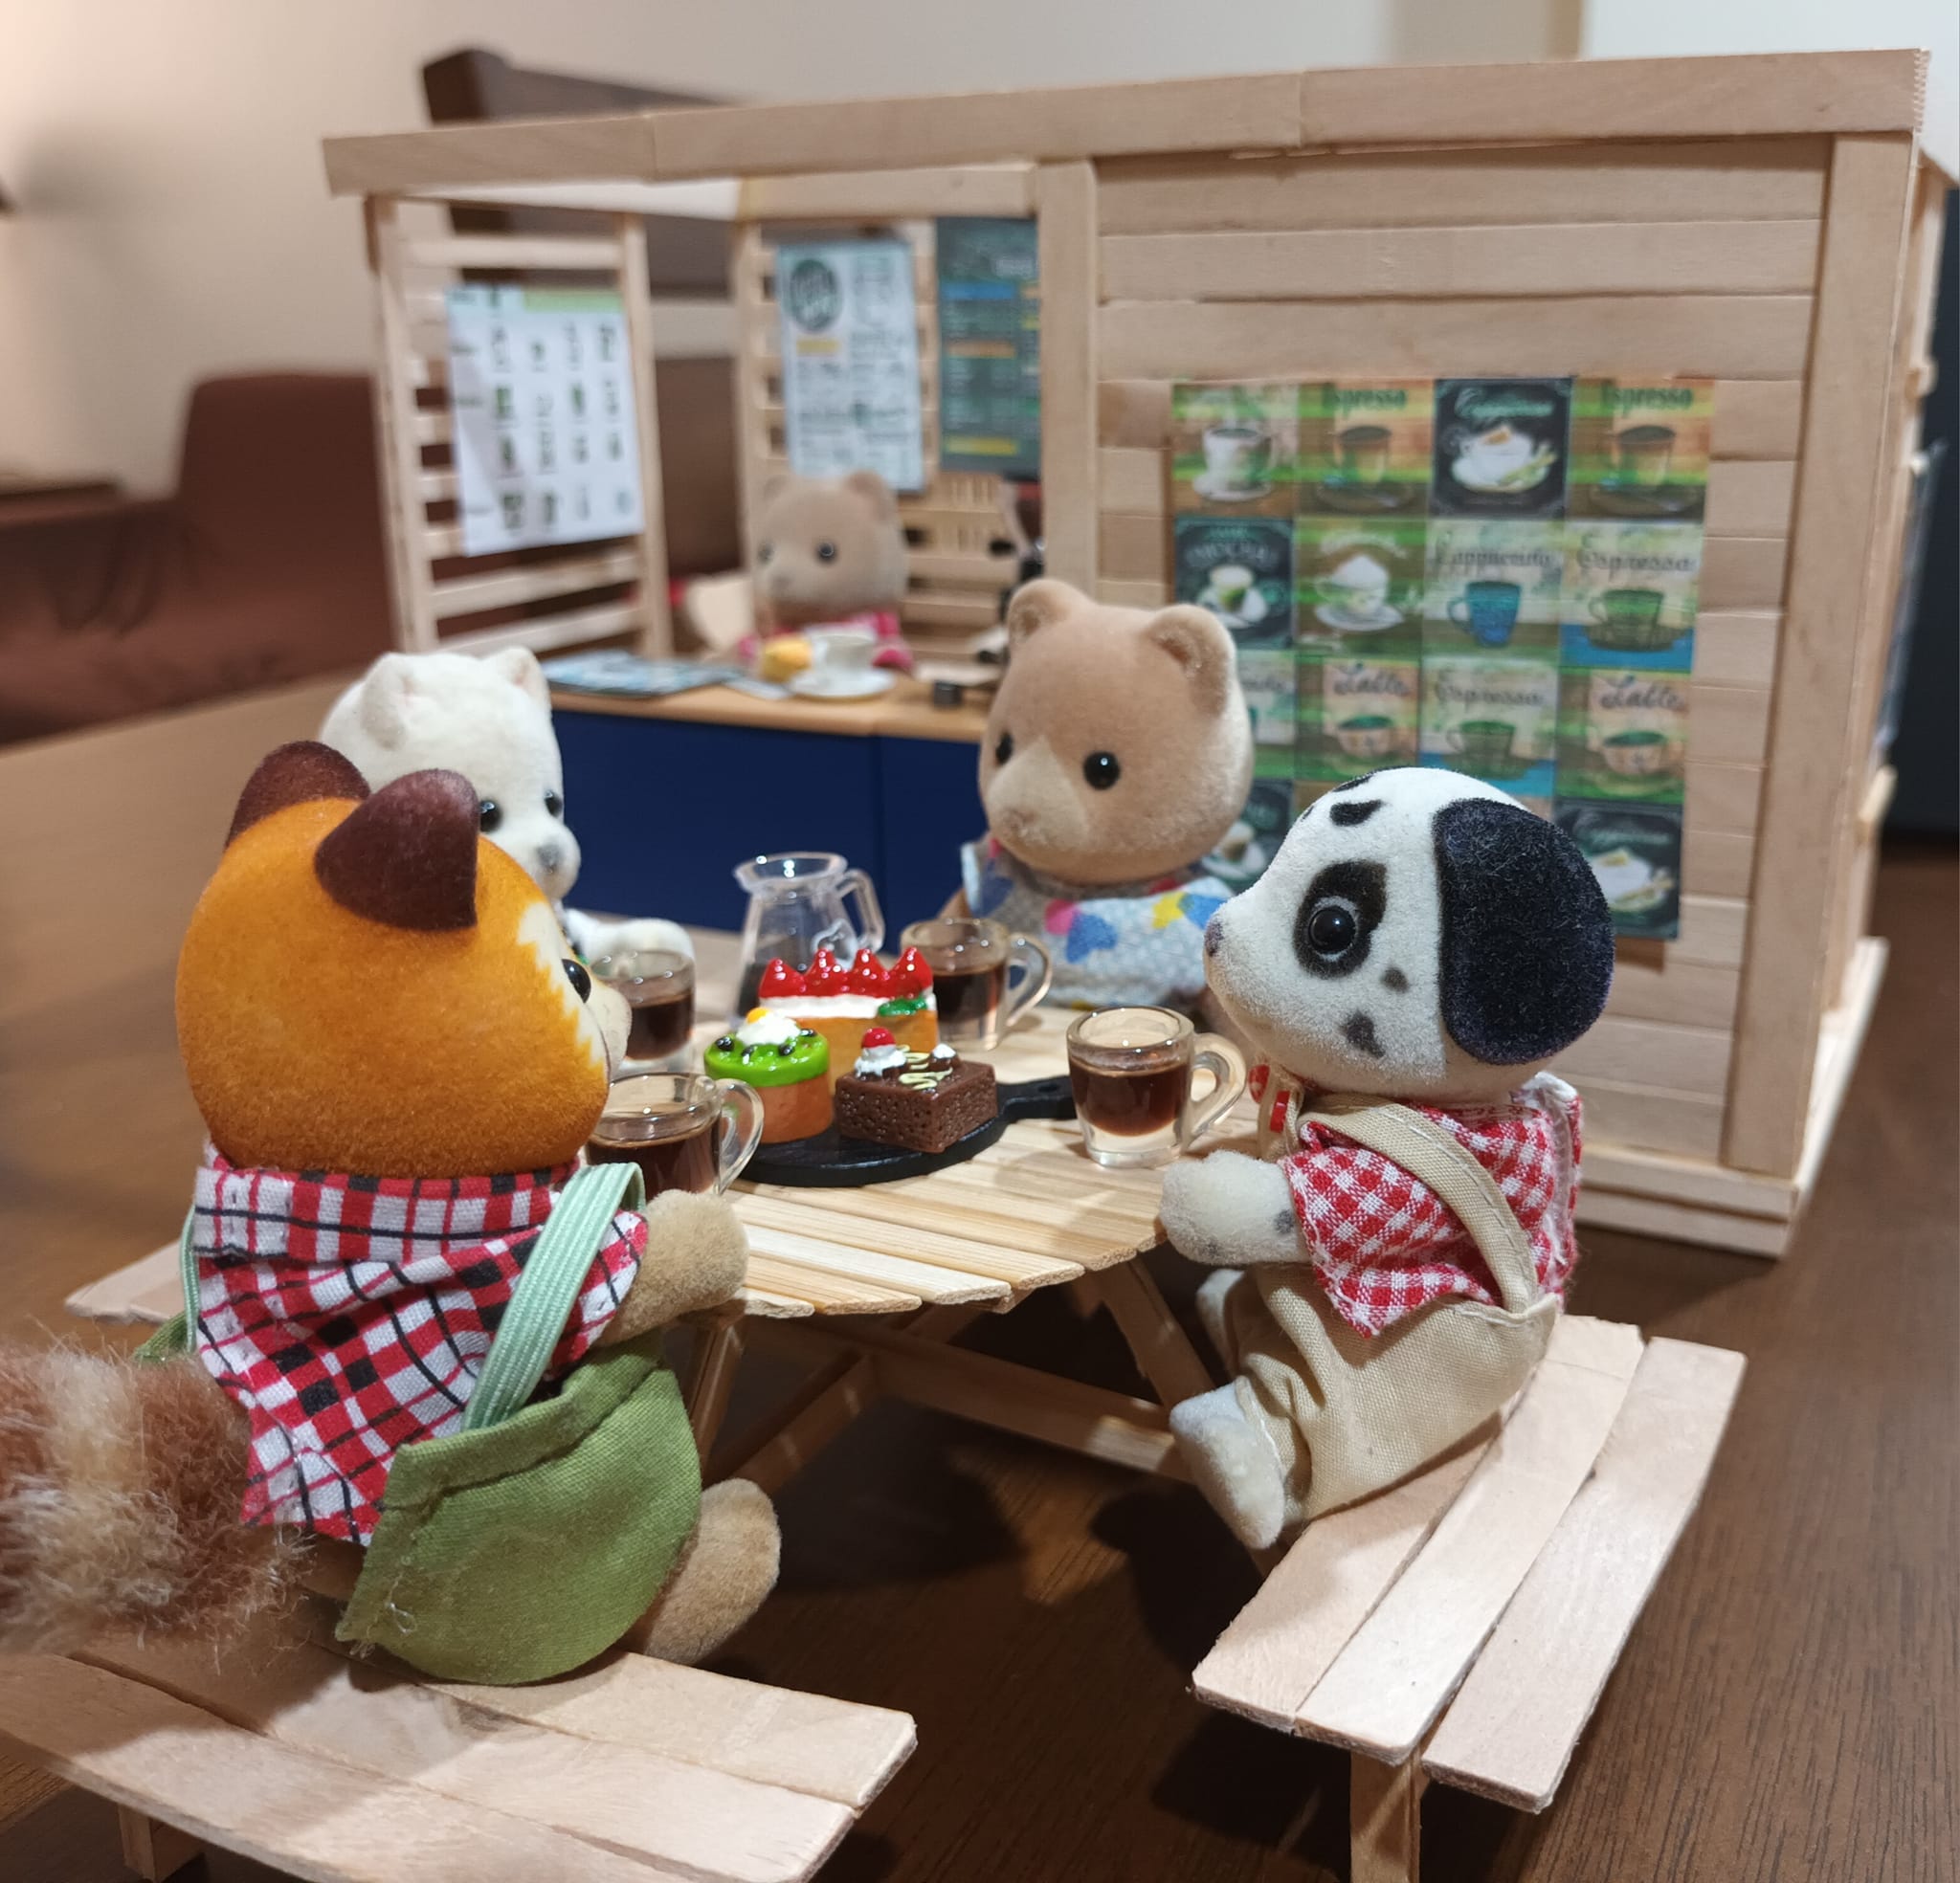 4 Calico Critters sitting at a picnic table, drinking coffee and eating cakes.